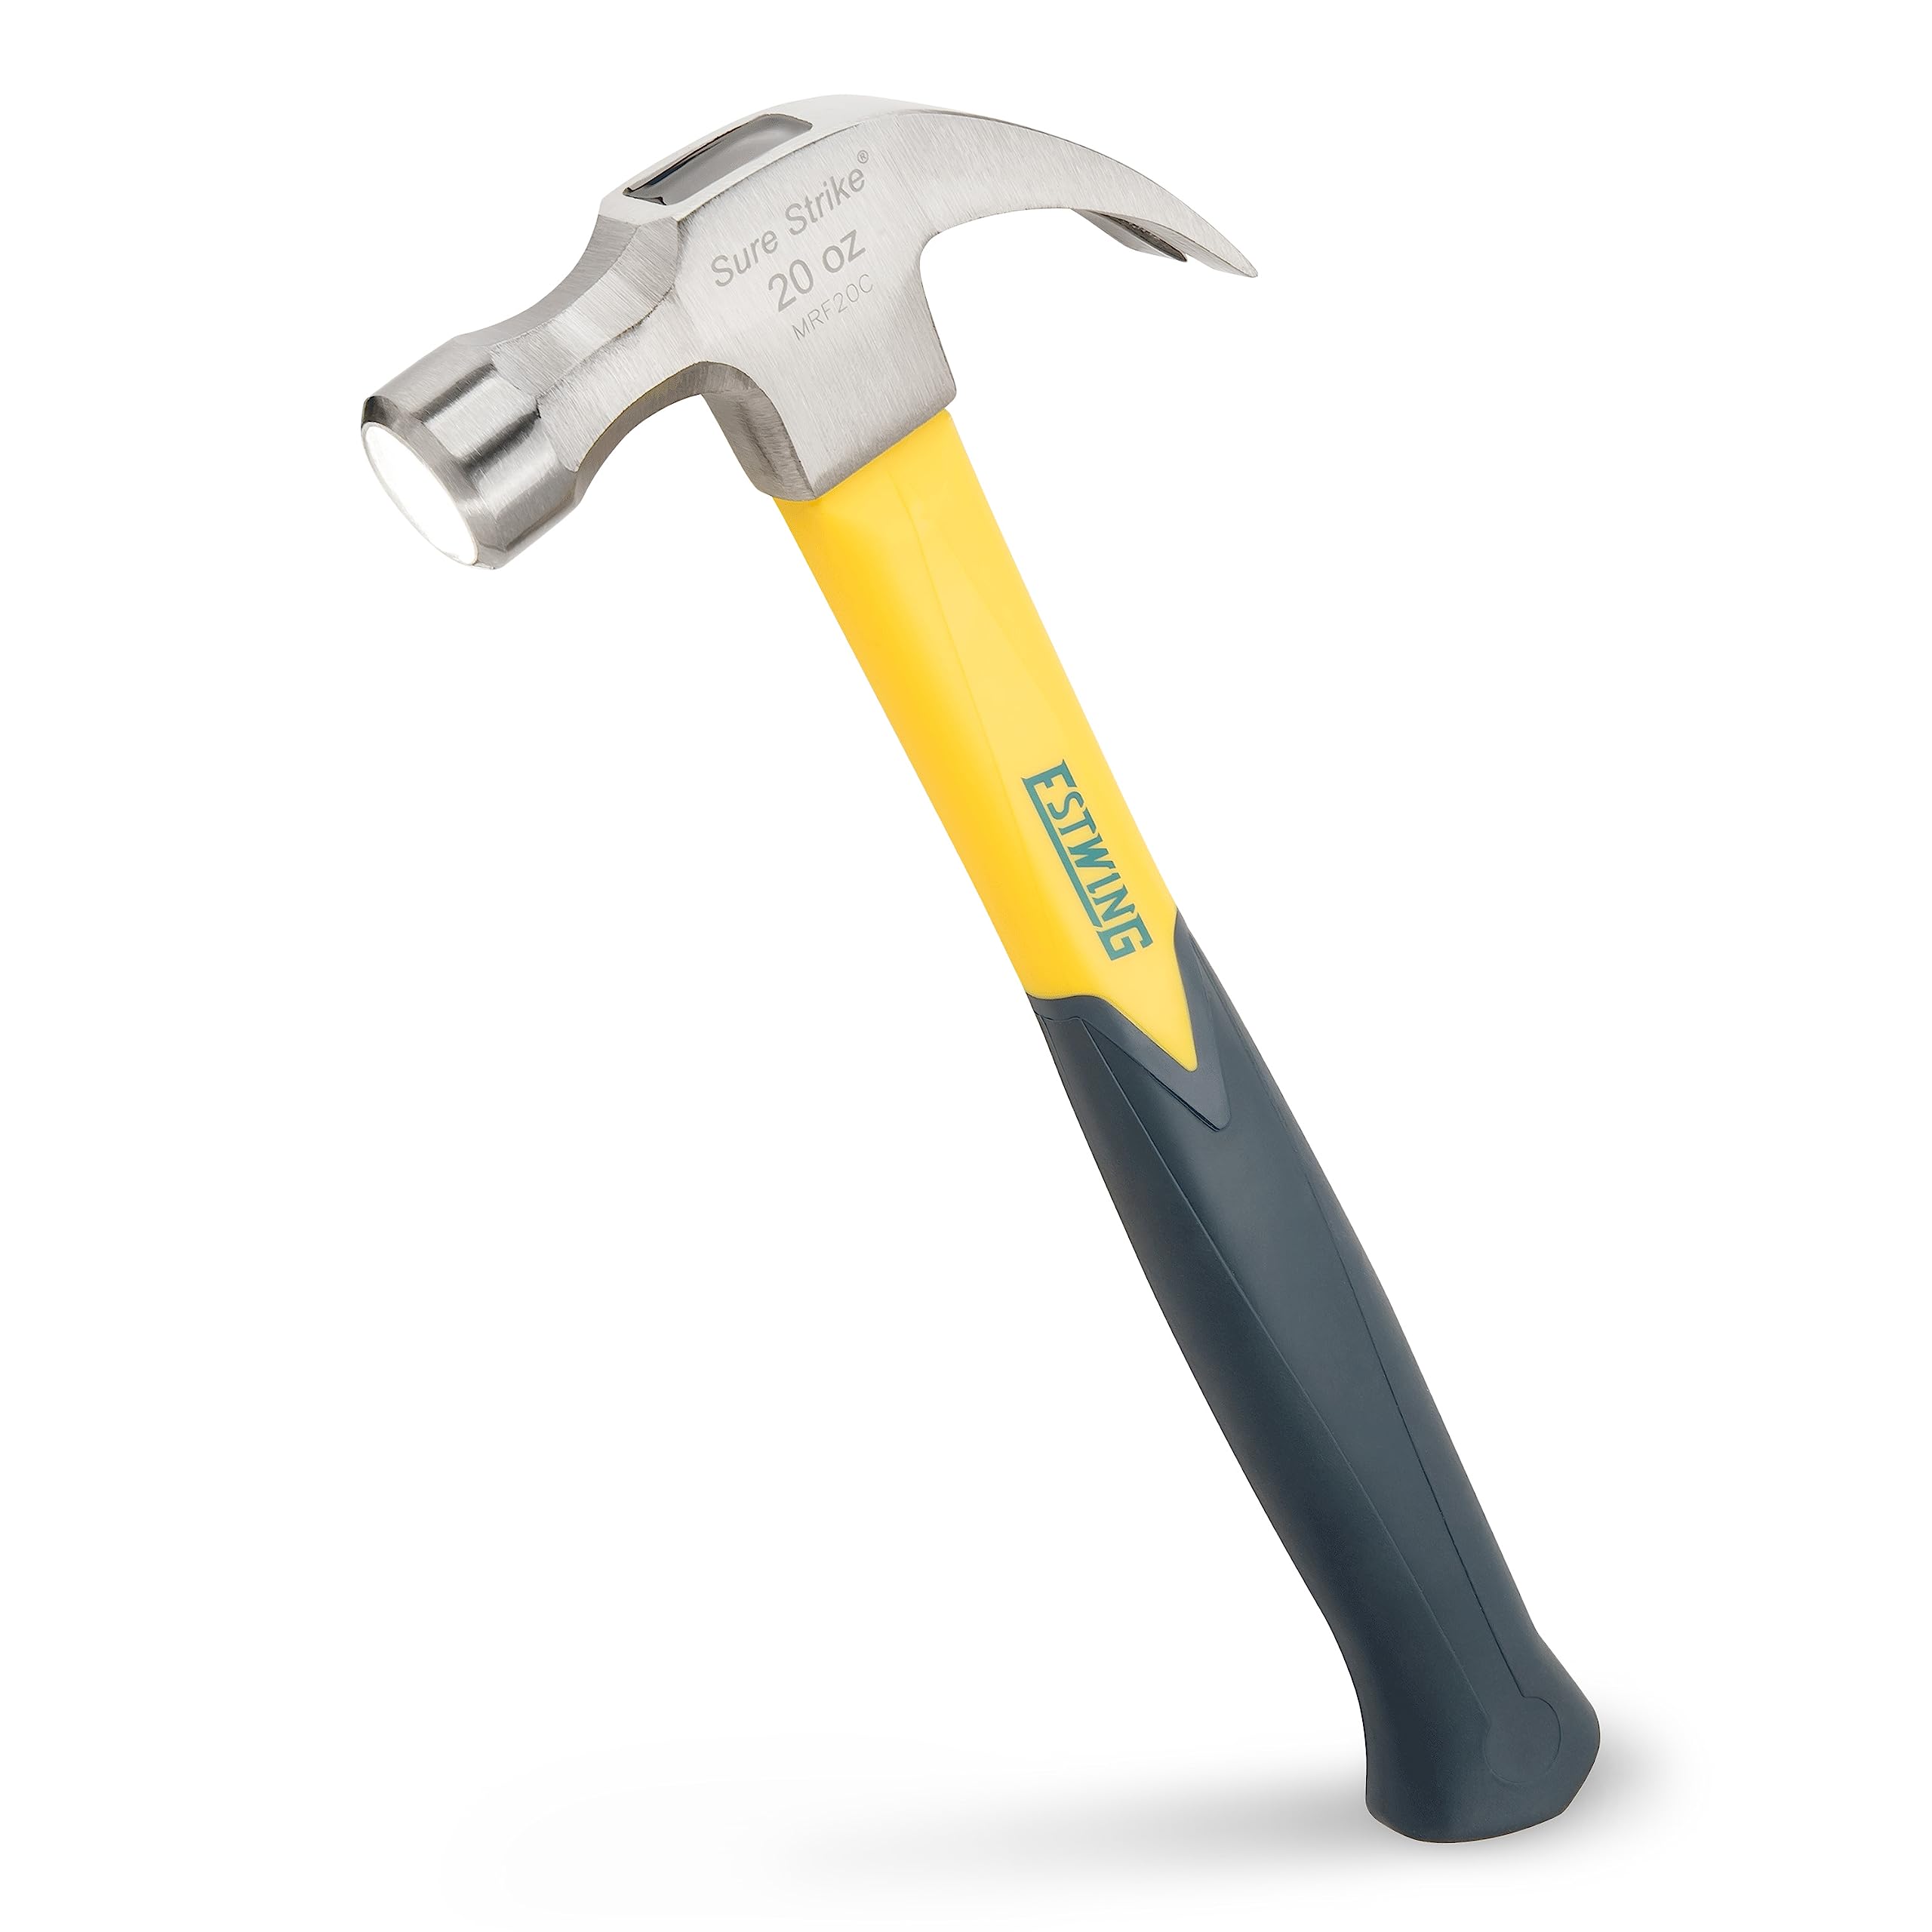 20-Oz ESTWING Sure Strike Curved Claw Hammer w/ Fiberglass Handle & No-Slip Cushion Grip $10.90 + Free Shipping w/ Prime or on $35+